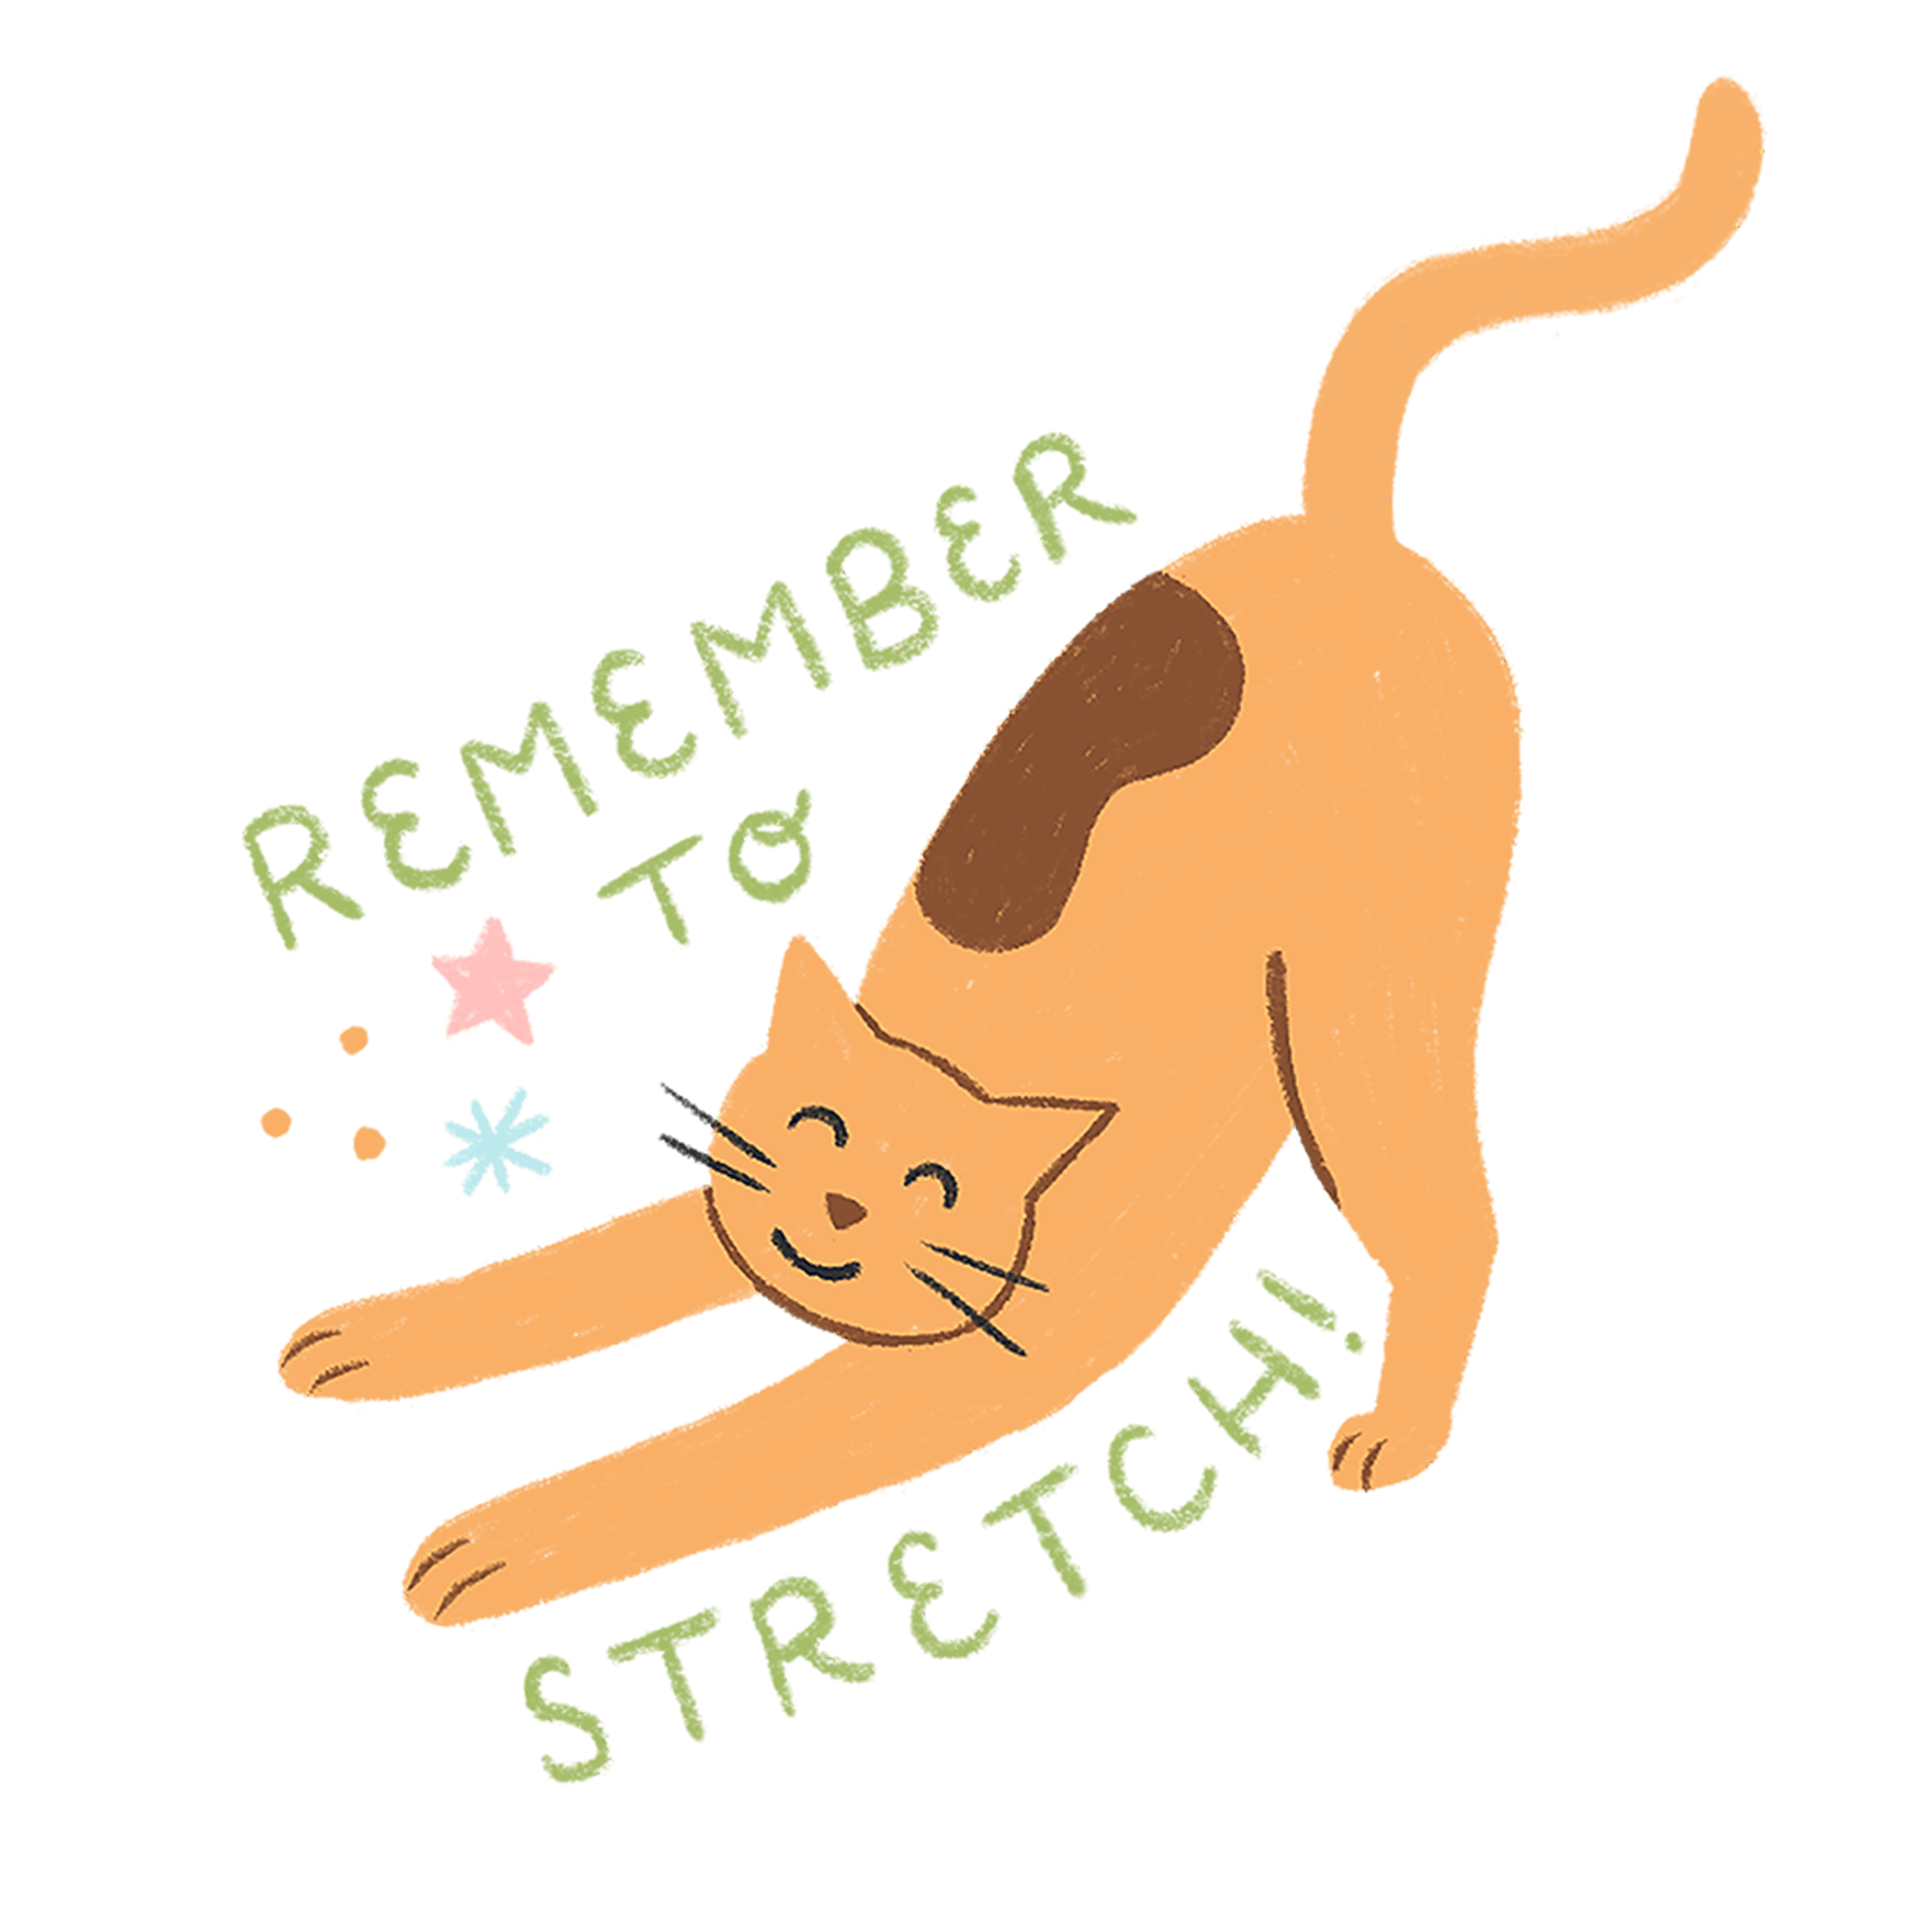 An illustration of a orange cat stretching, with th ewords 